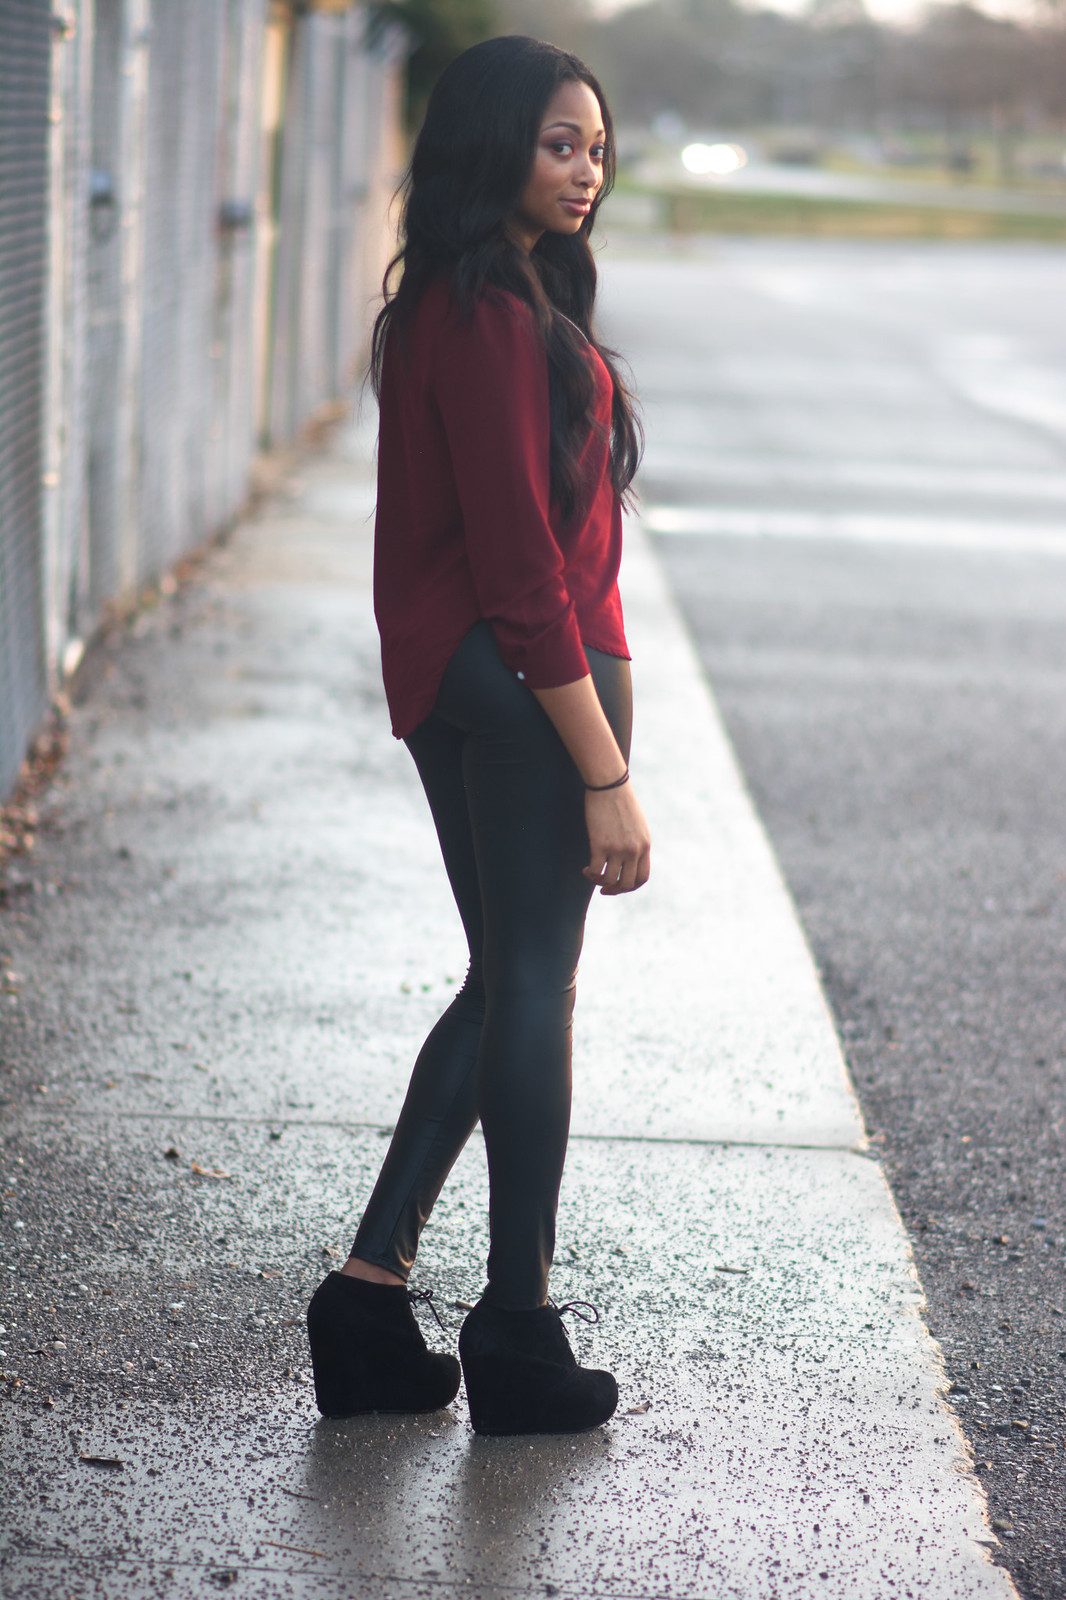 baton rouge street style casual outfit with leggings